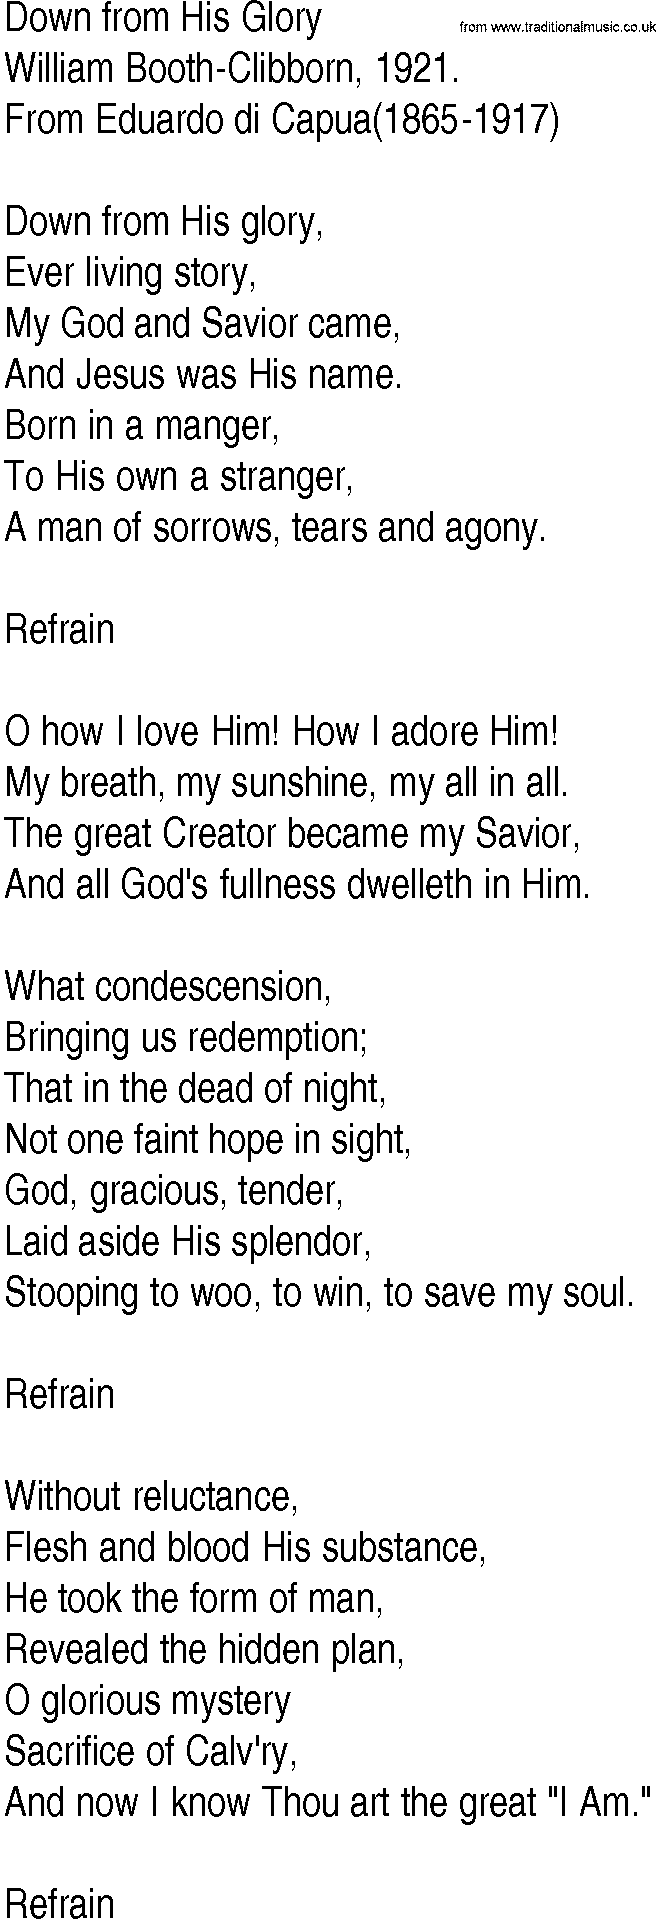 Hymn and Gospel Song: Down from His Glory by William BoothClibborn lyrics